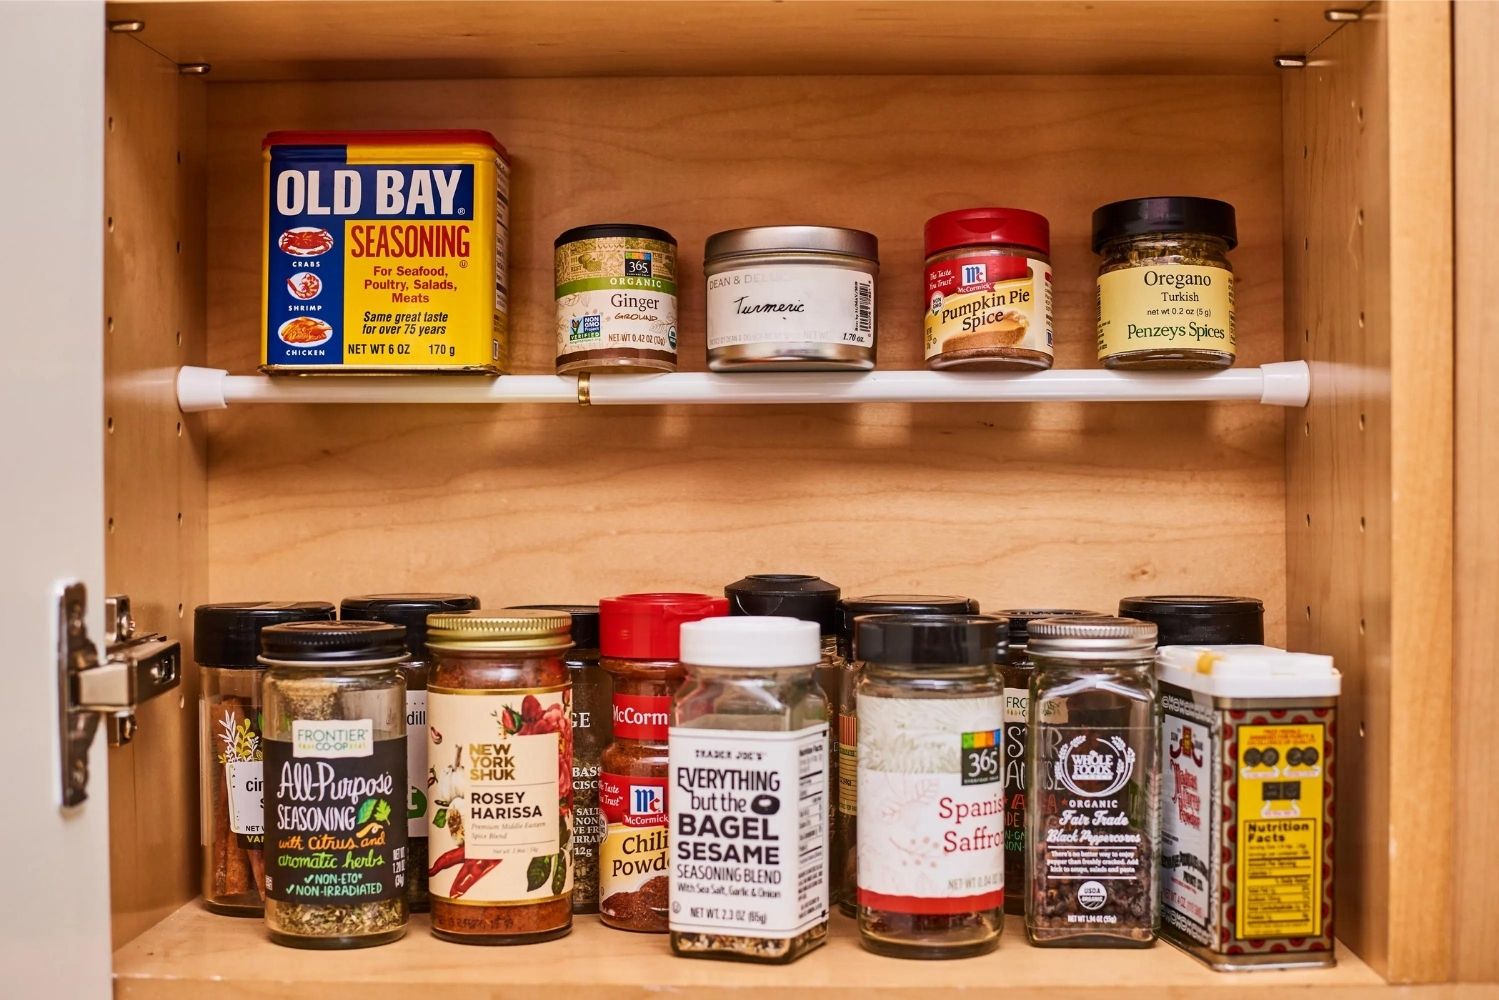 Clever ideas for how to store your spice collection